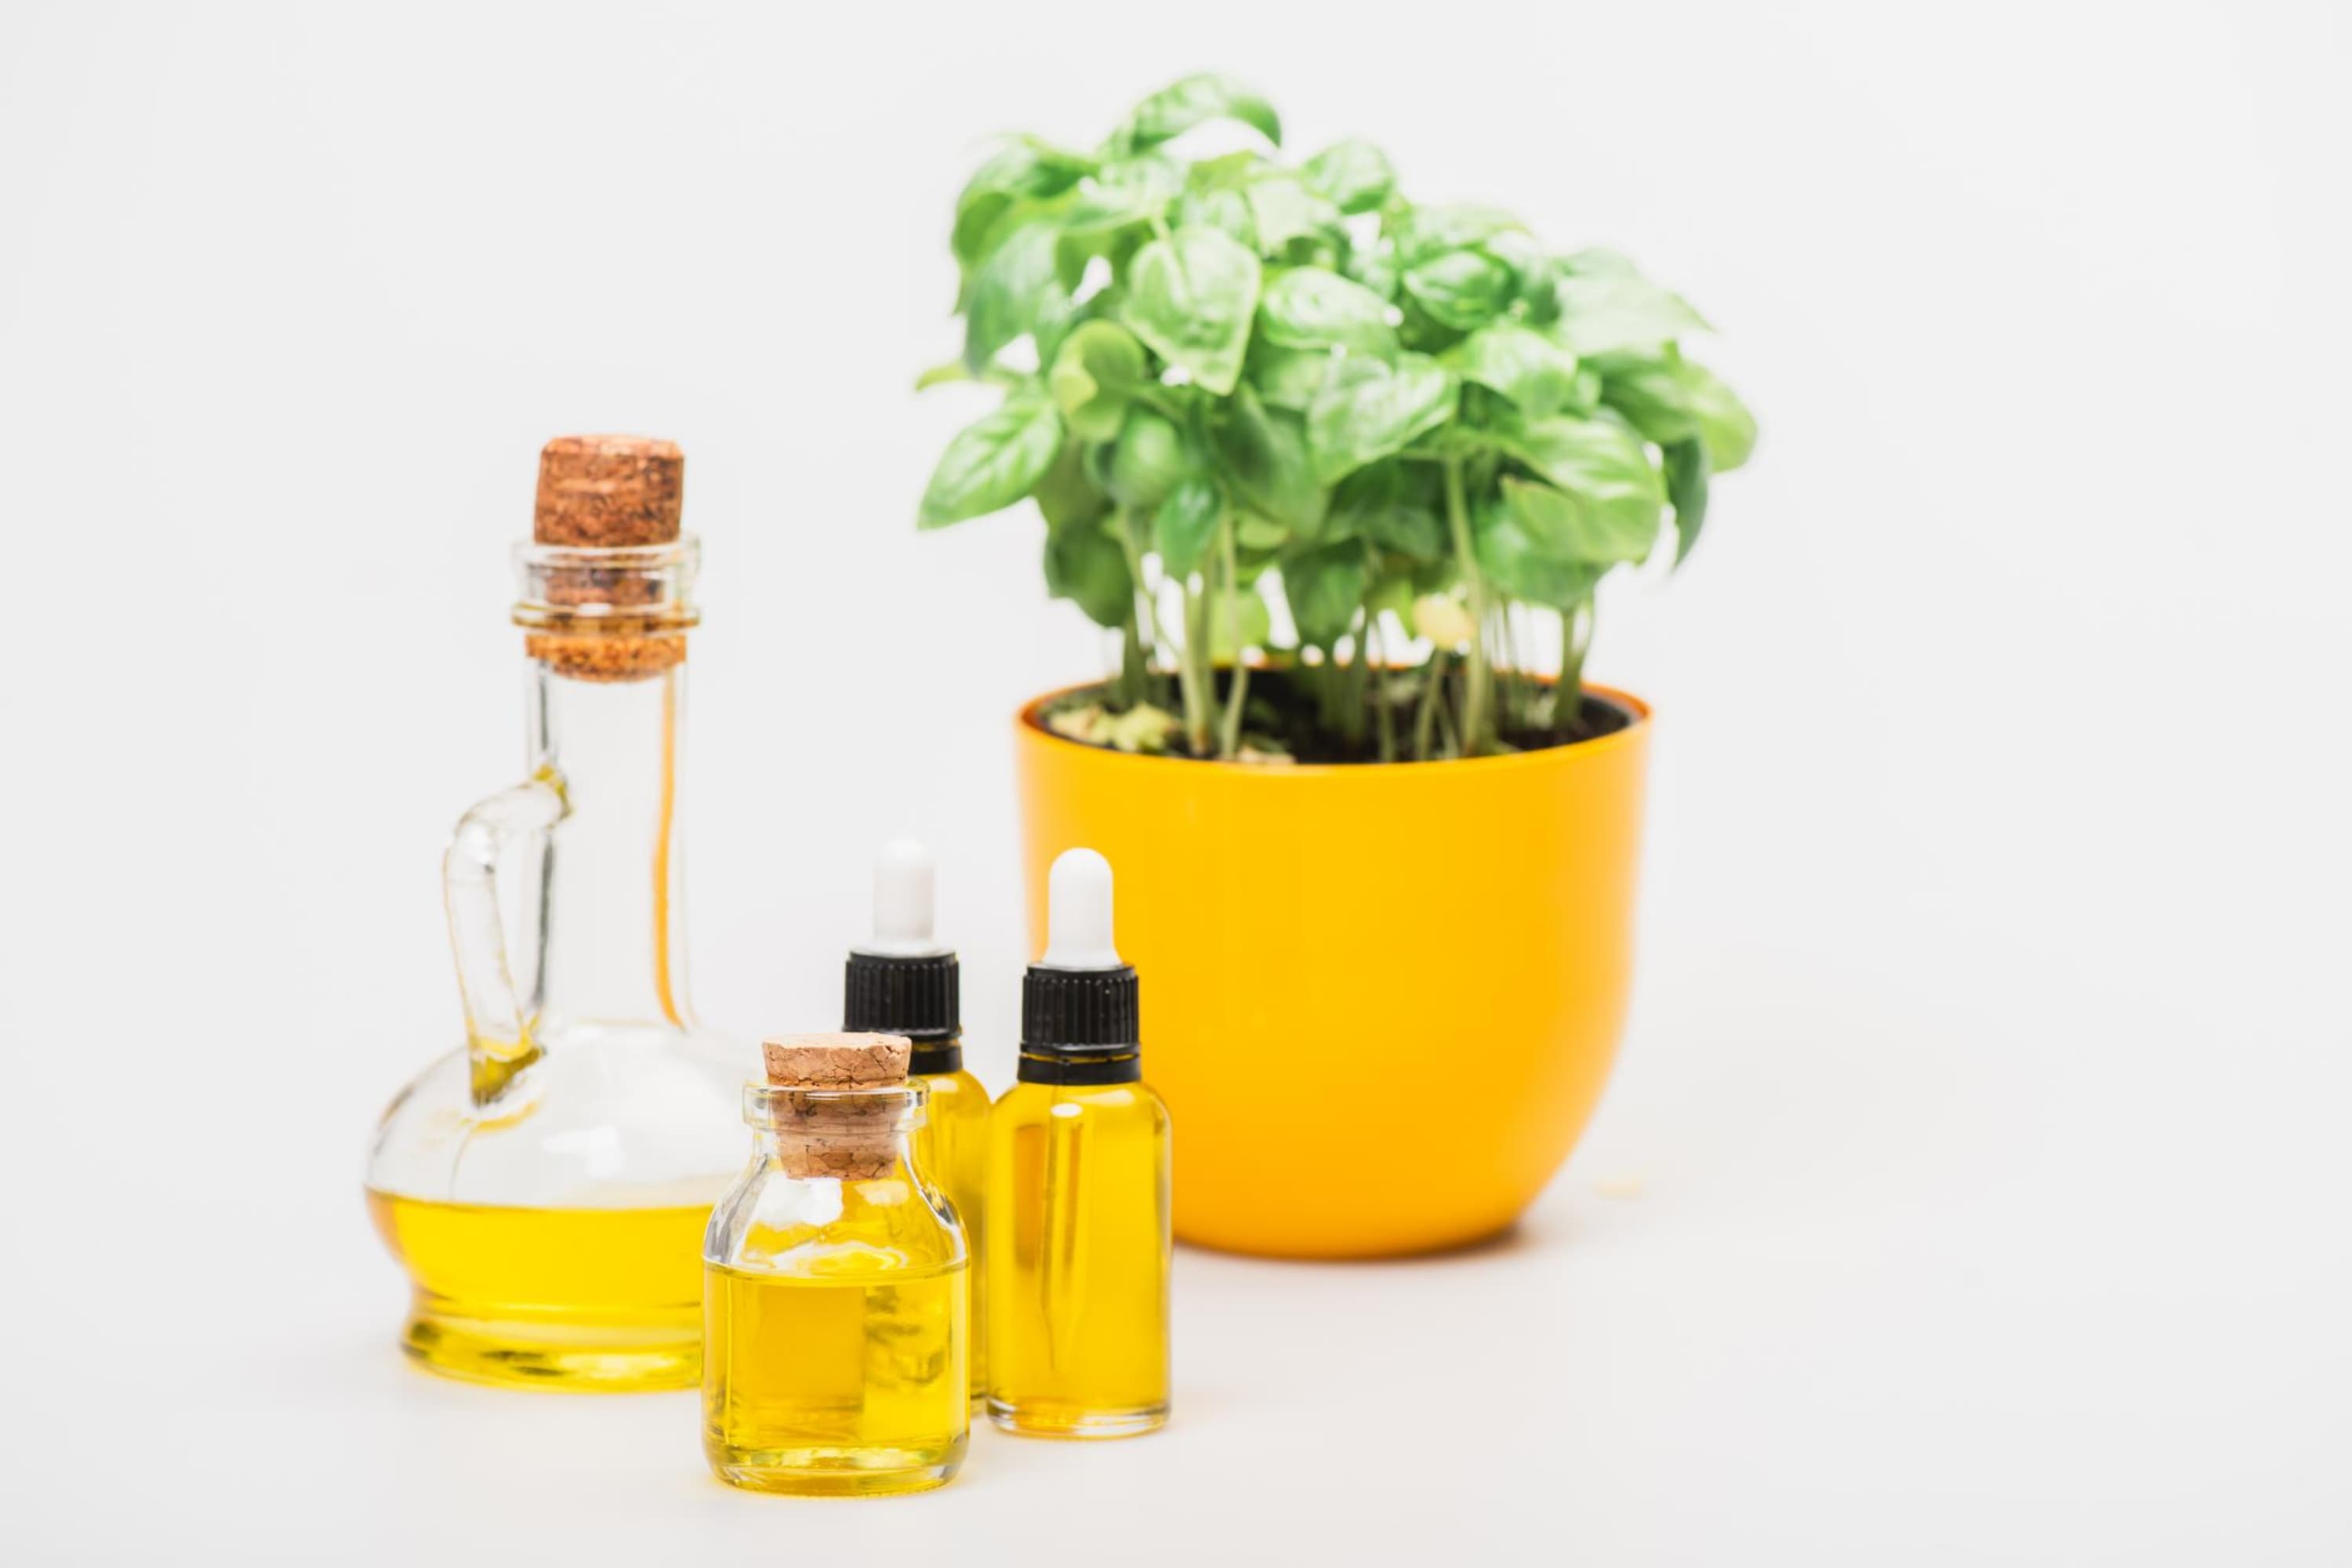 What You Should Know About the Potential Danger Neem Oil May Cause